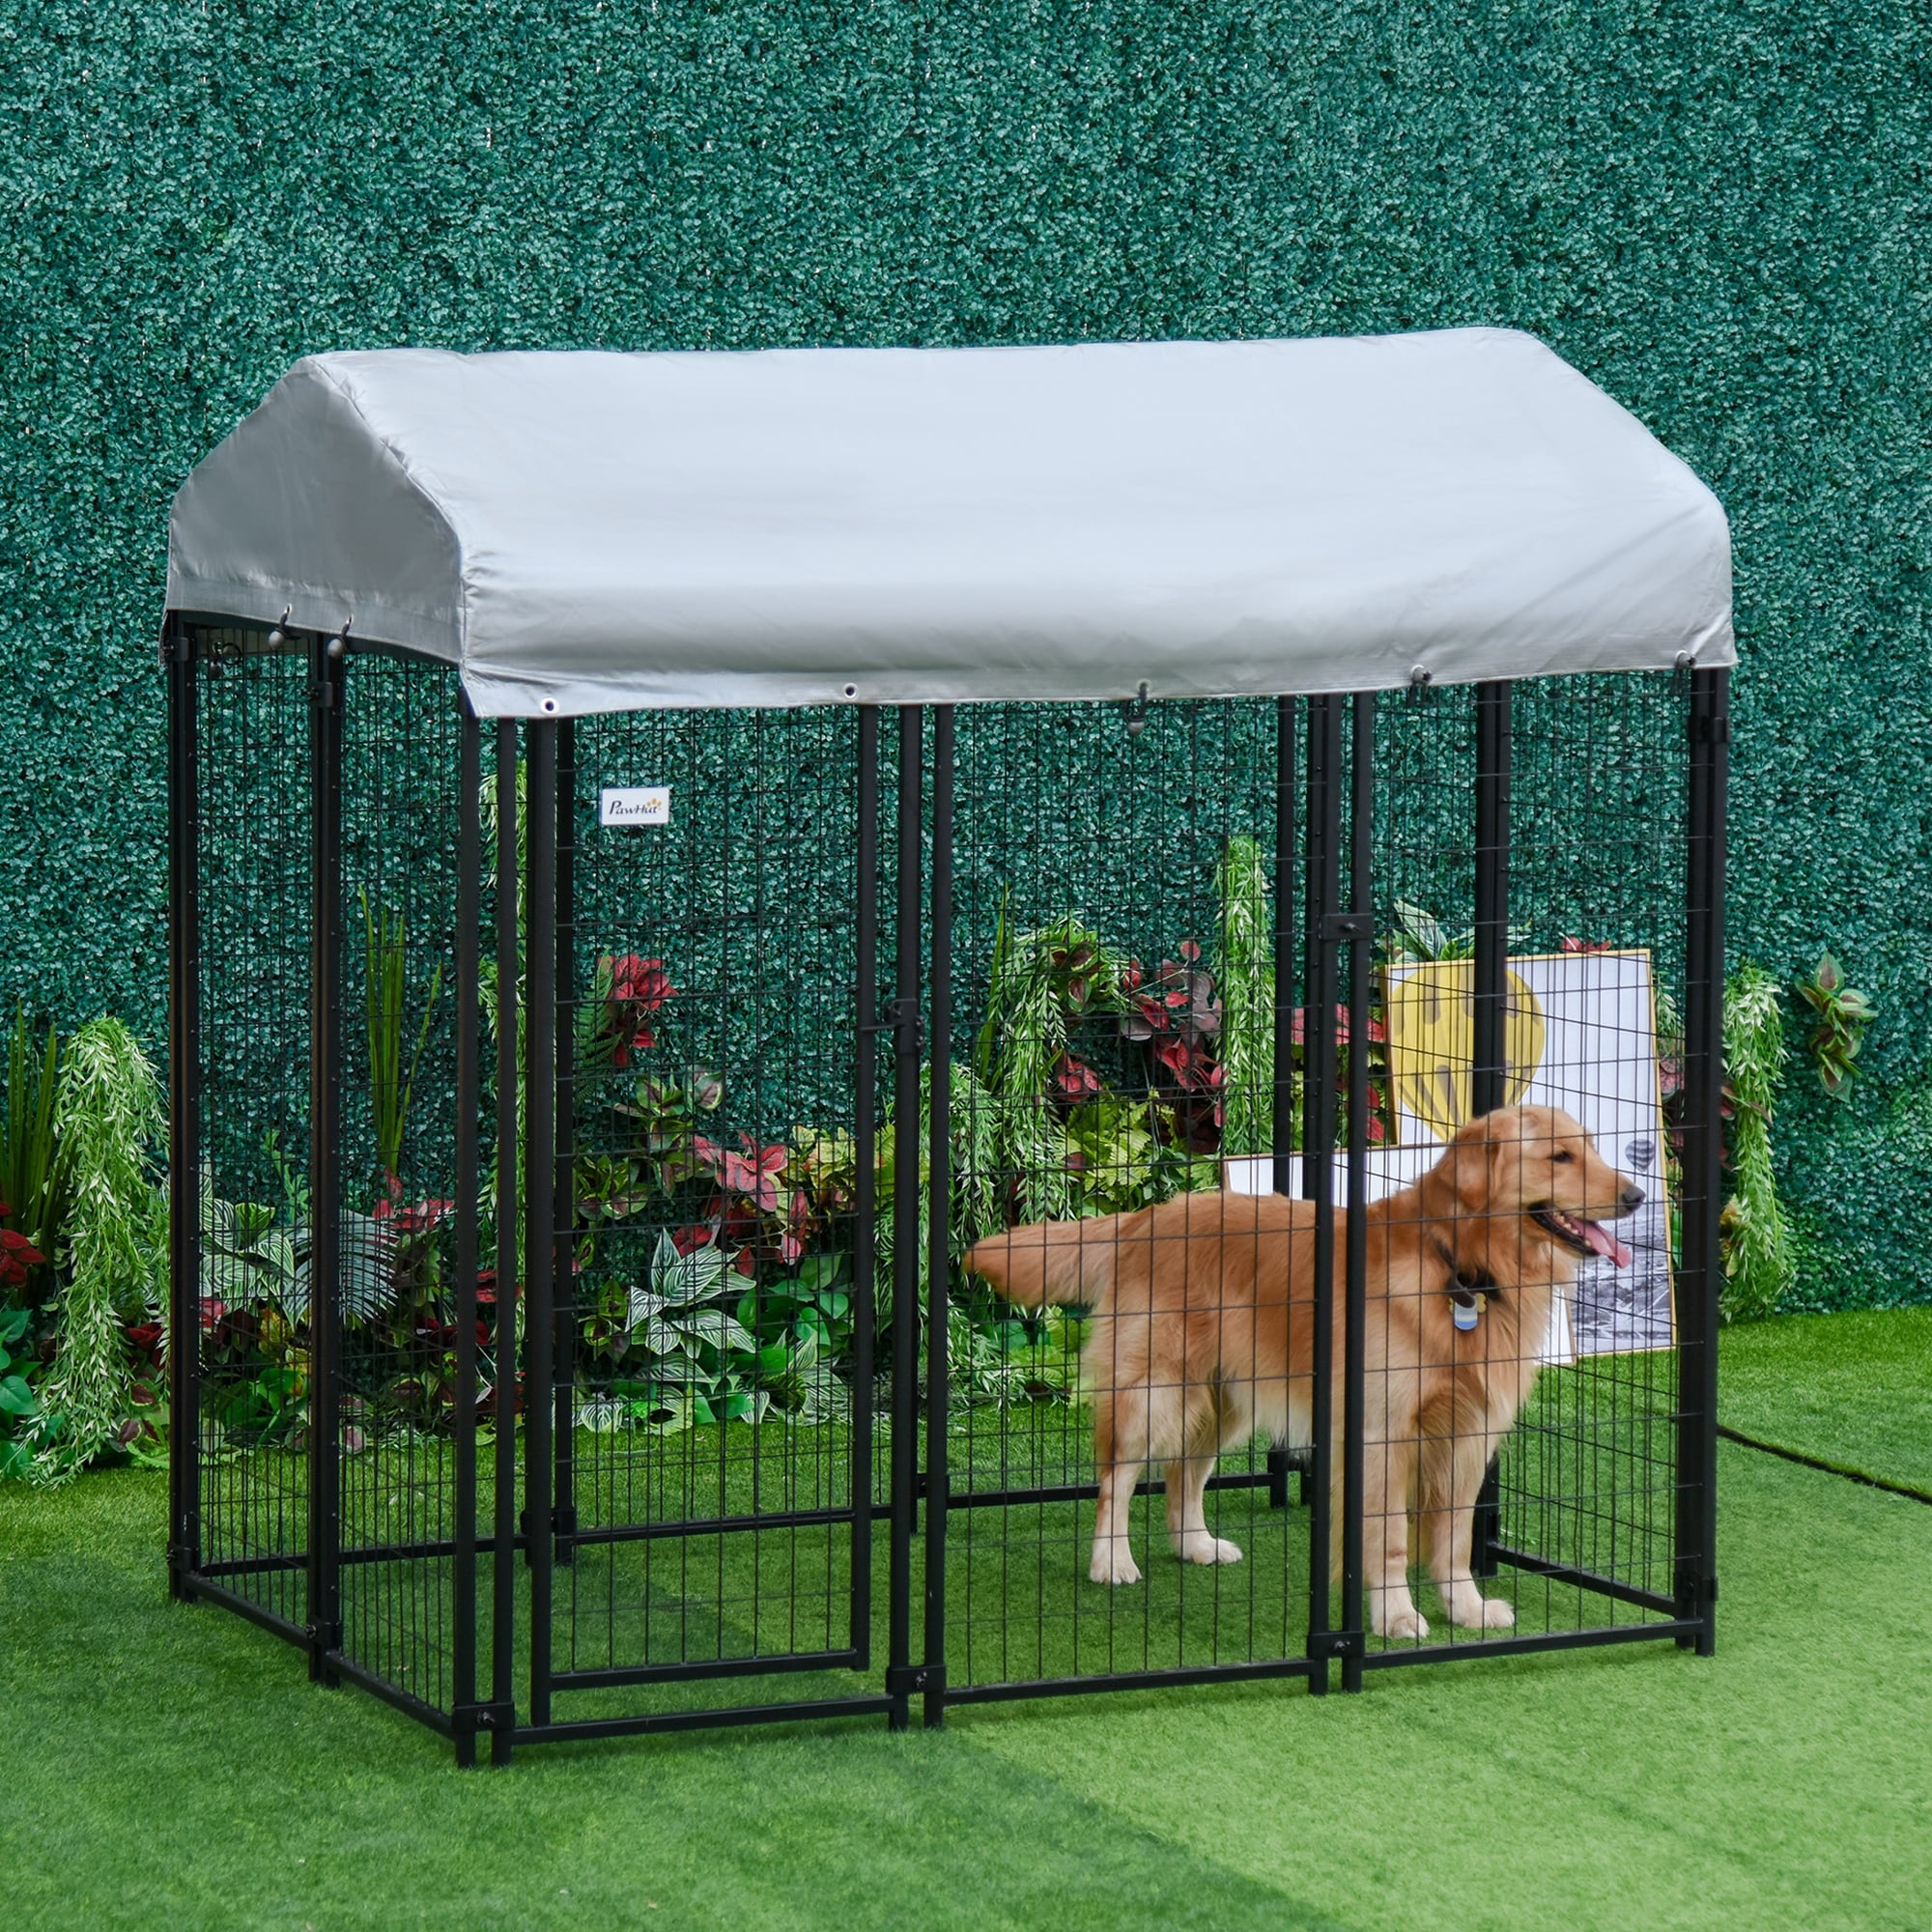 https://ak1.ostkcdn.com/images/products/is/images/direct/7e0ddb267749b55317f07072d3ddd1c1f3c94498/Pawhut-Large-Outdoor-Dog-Kennel-Galvanized-Steel-Fence-with-UV-Resistant-Oxford-Cloth-Roof-%26-Secure-Lock.jpg